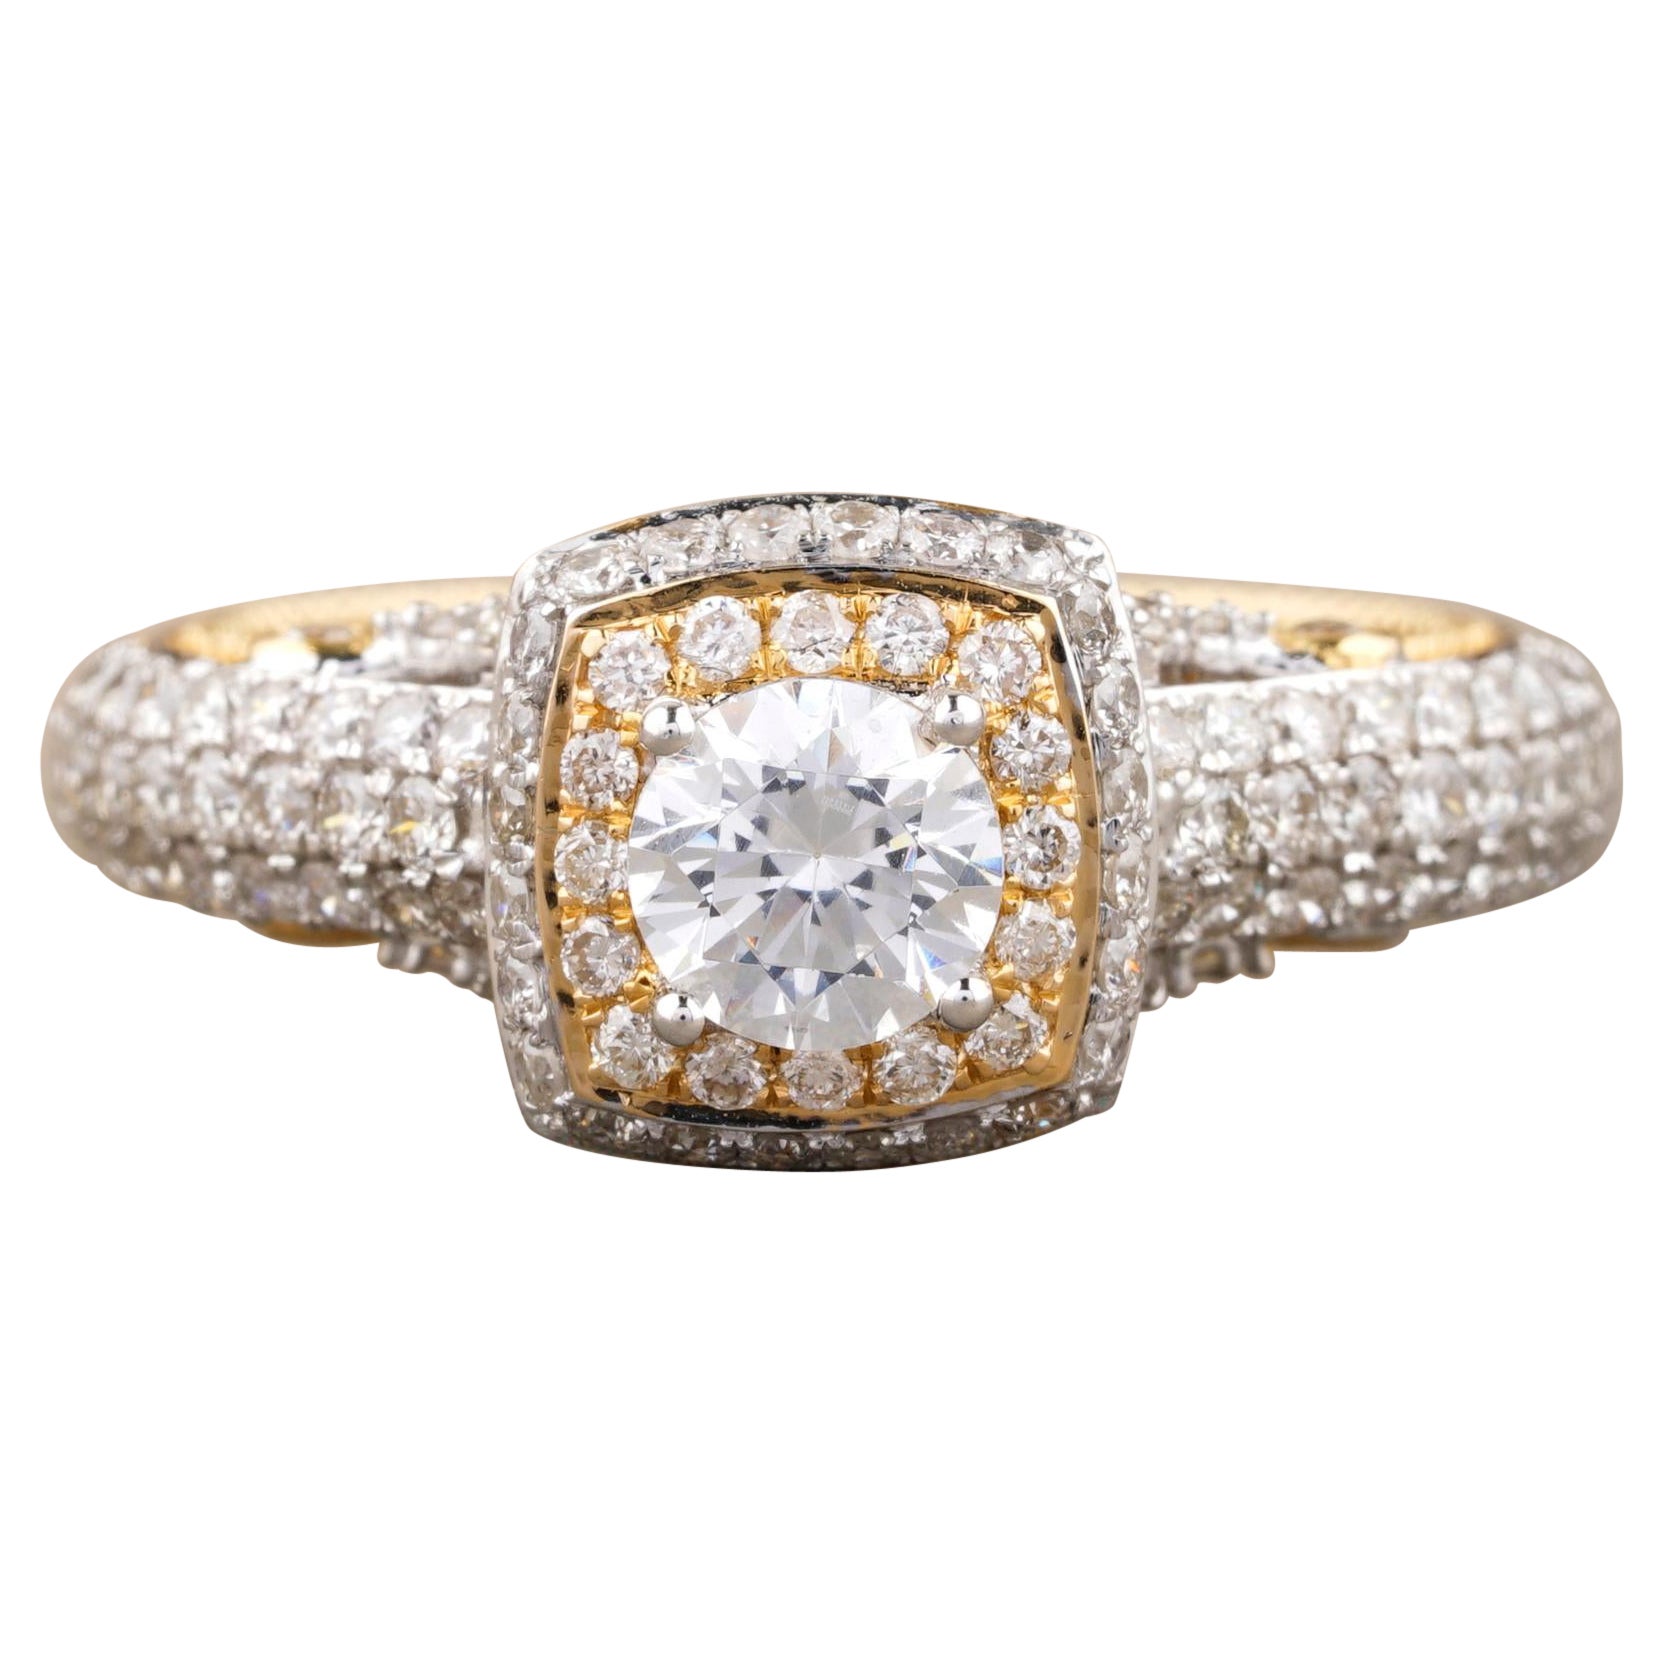 1 Carat Round Solitaire Diamond Ring with Illusion Setting in 18k Solid Gold